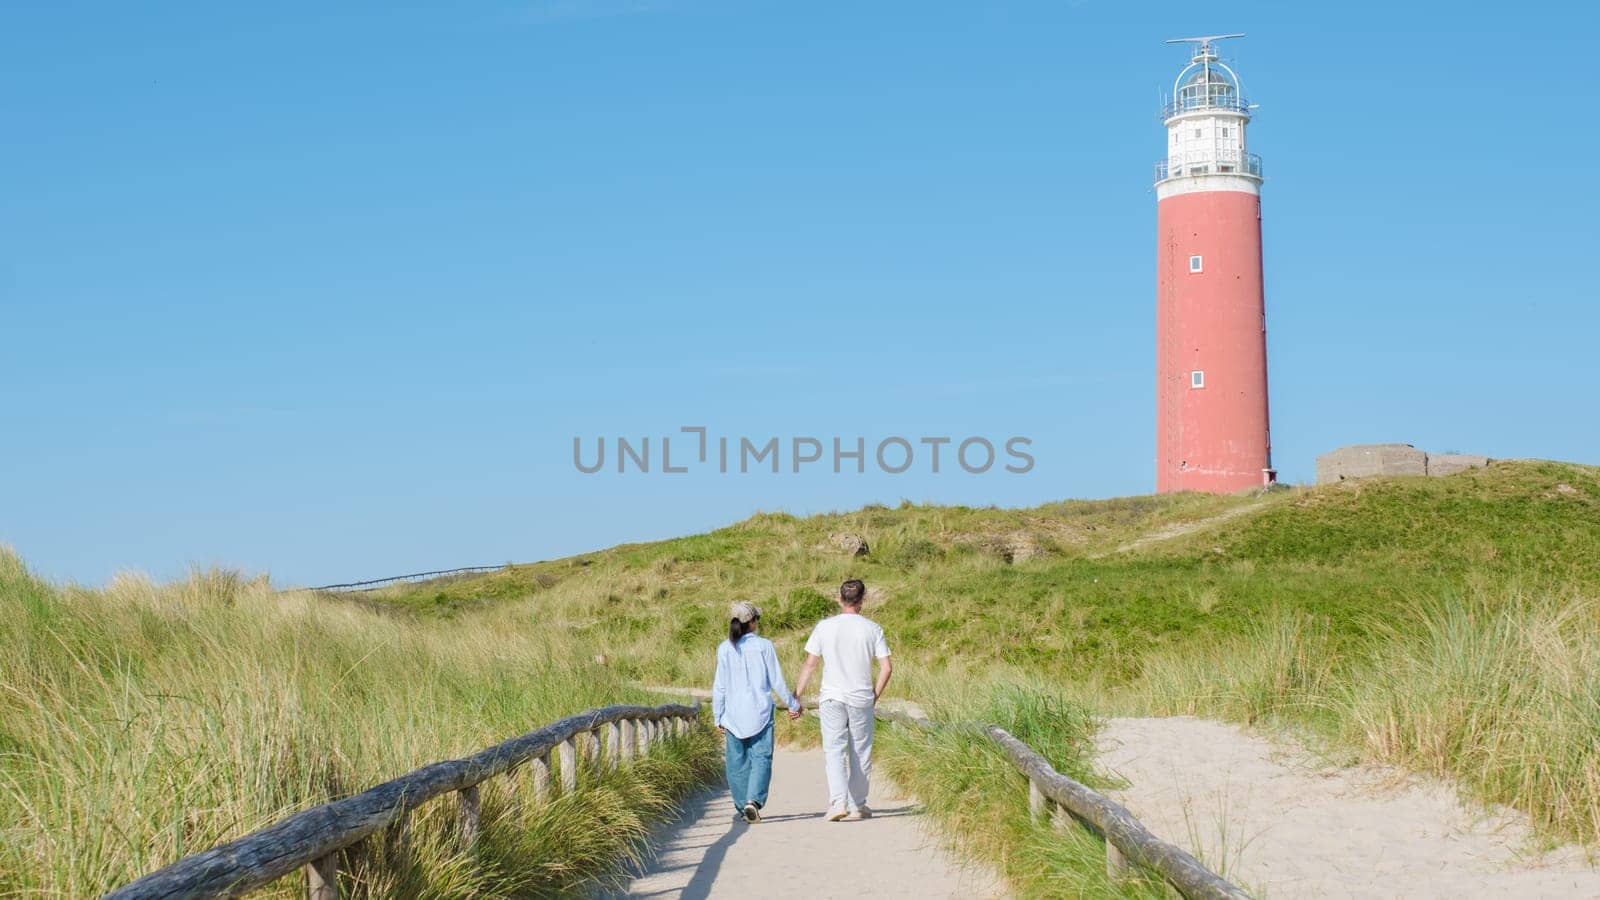 A couple leisurely walks along a scenic path near a historic lighthouse in Texel, Netherlands.